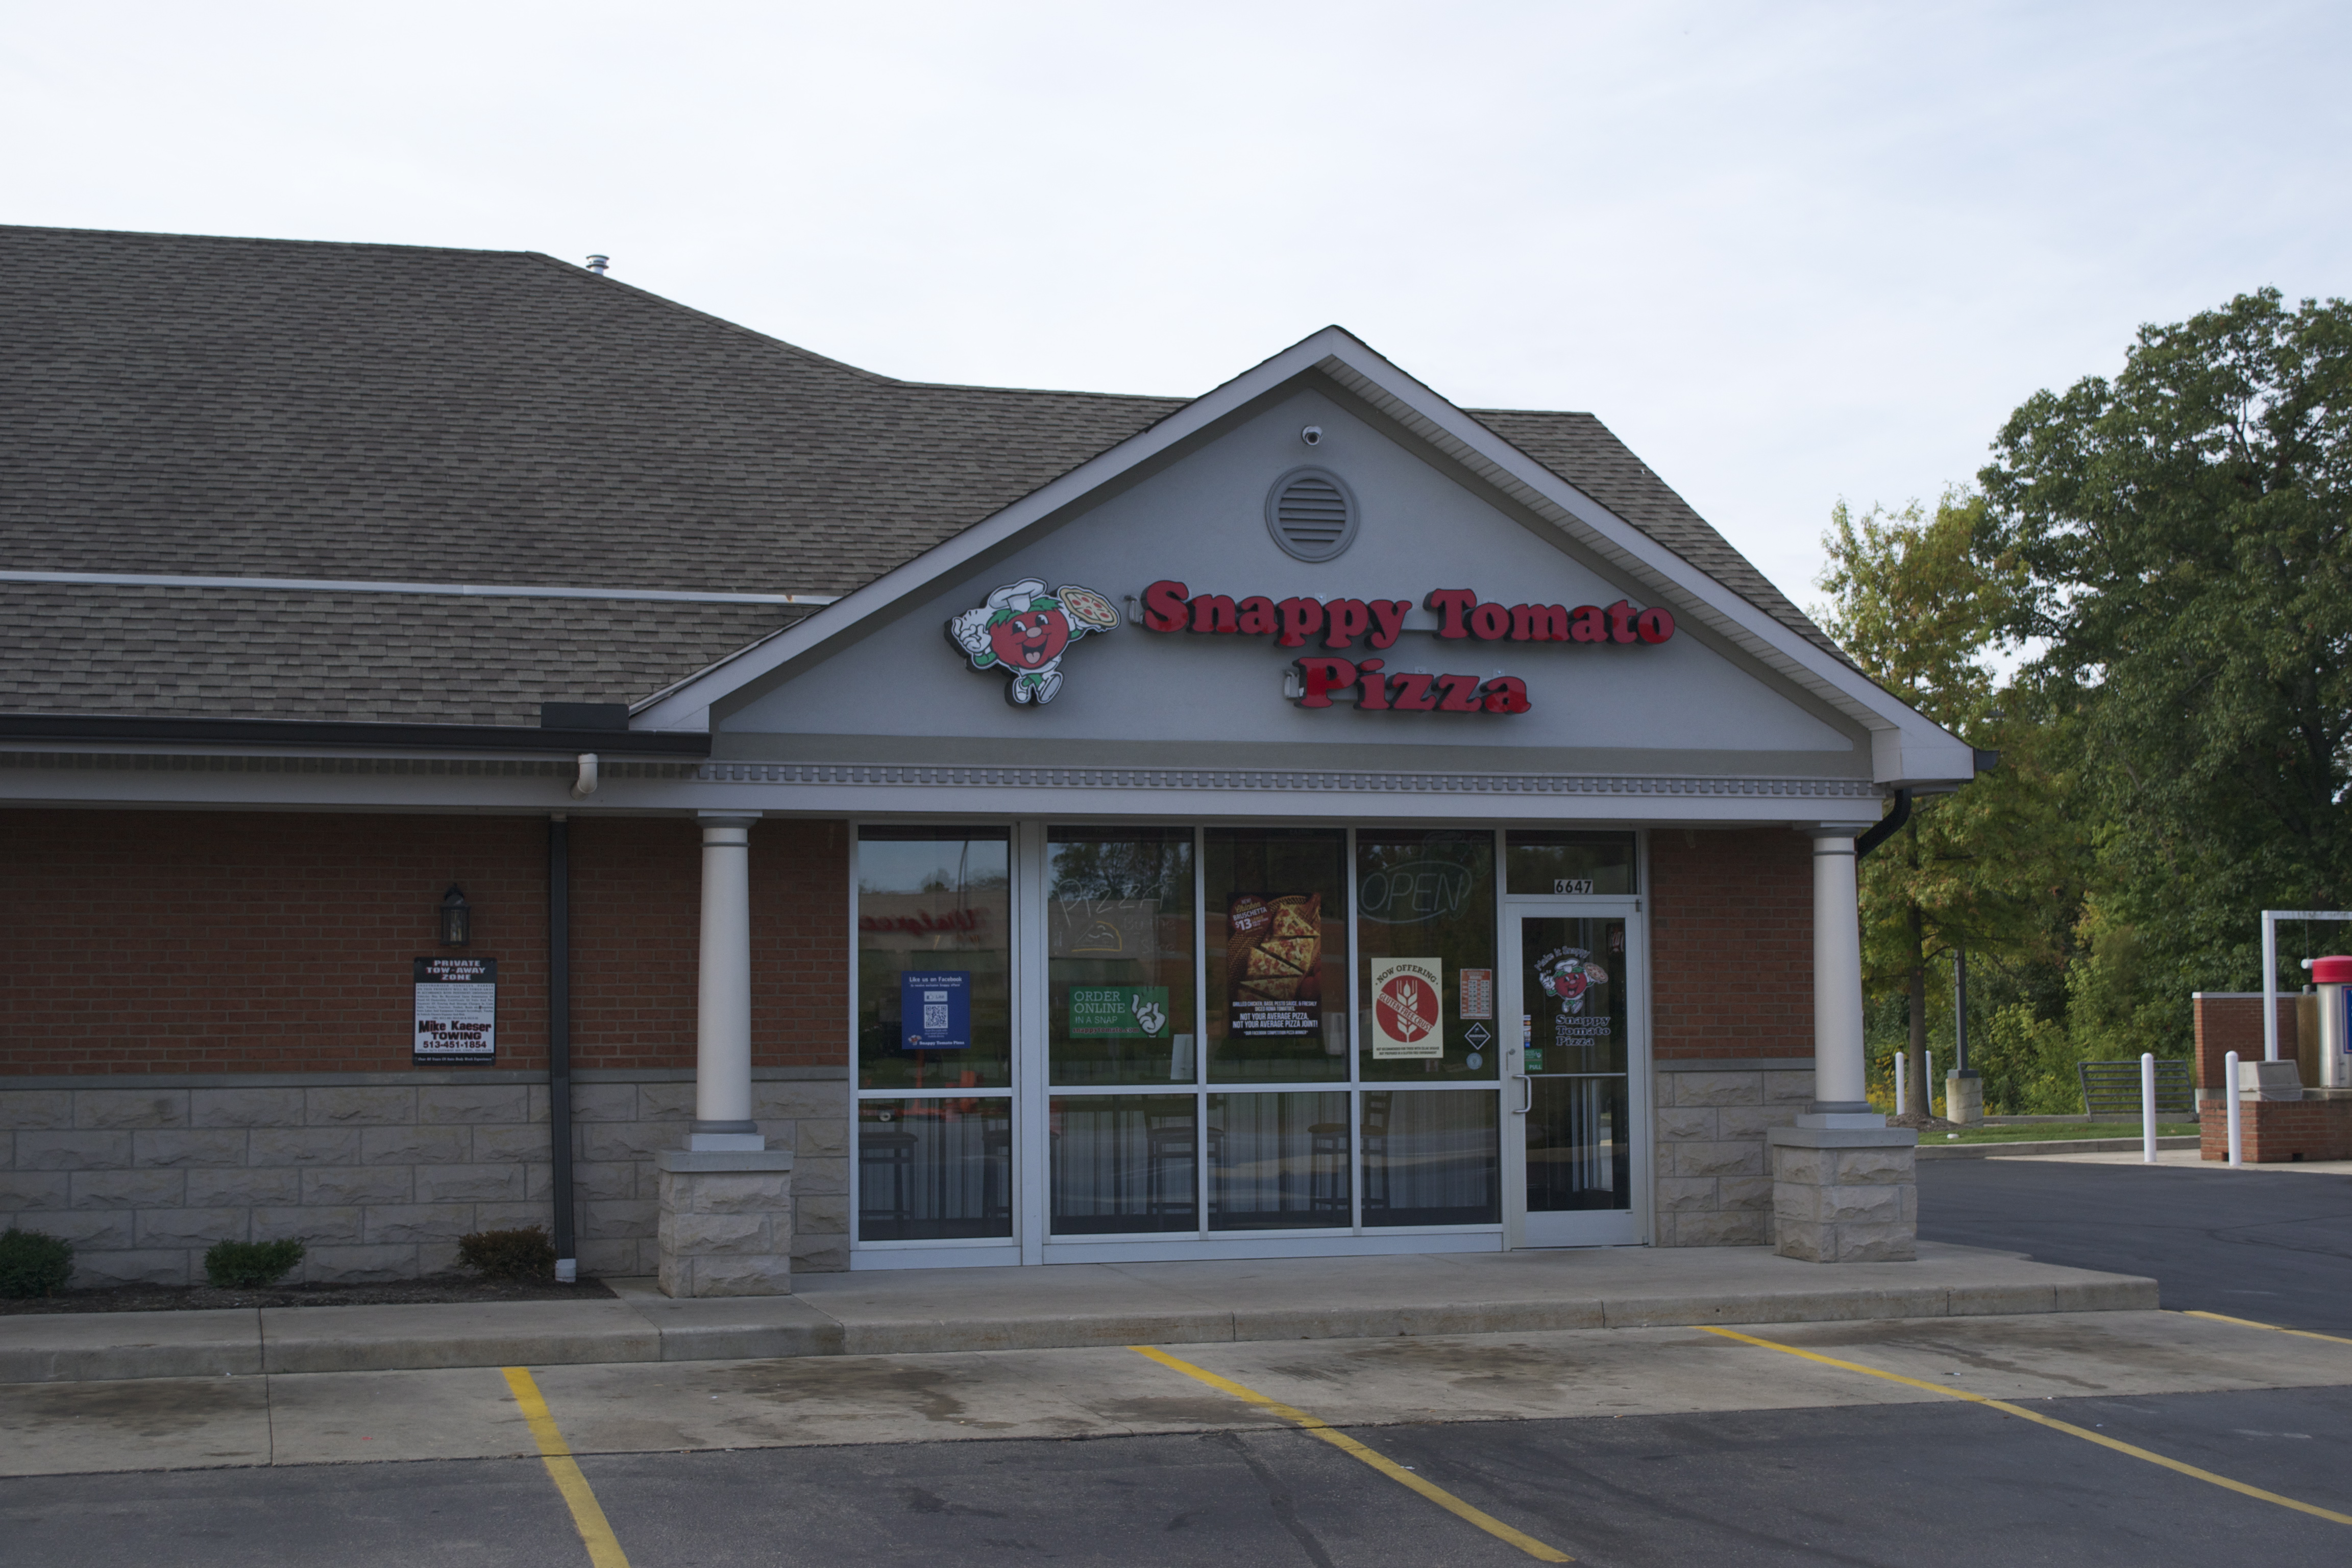 Franchisee Location – Typical Strip Mall Restaurant - Restaurant offers speedy delivery, pick-up ordering and full dining experience with menu and buffet selections.  This could be your restaurant:  https://www.snappytomato.com/franchise-info/
#SnappyTomato
